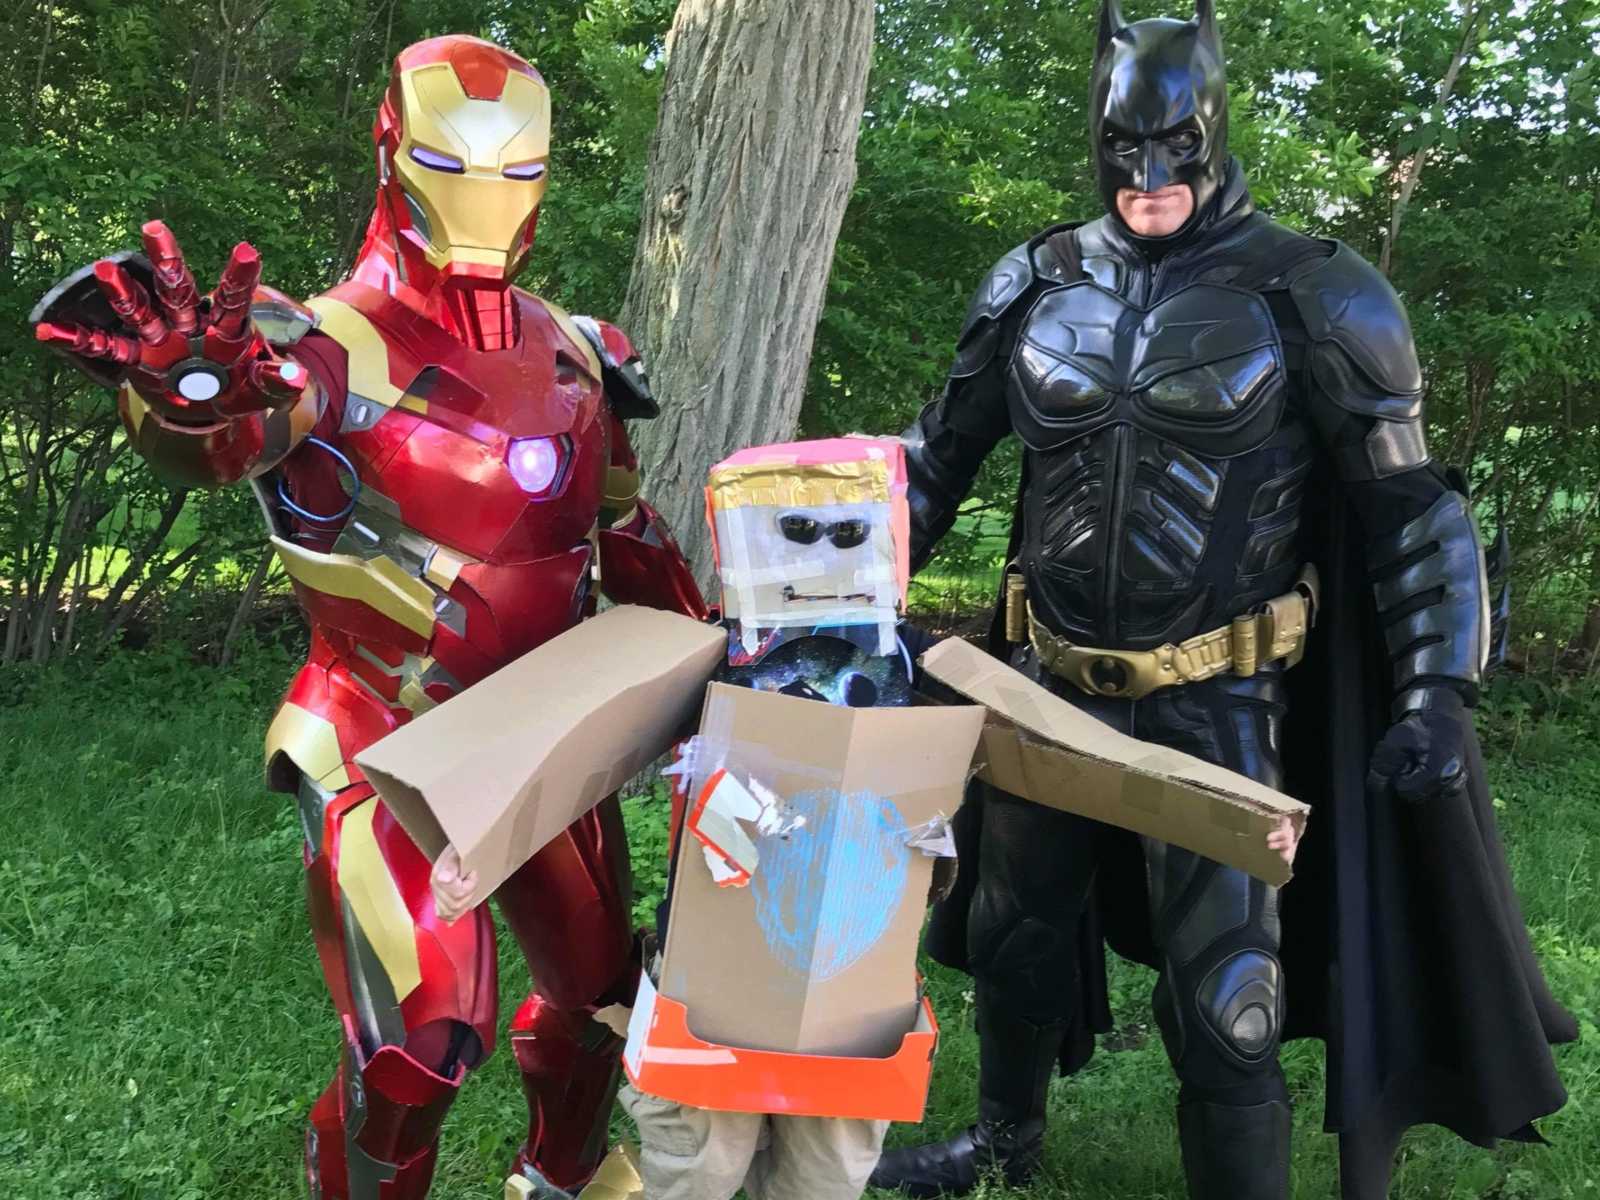 Little boy with cancer wears homemade iron man suit made out of cardboard next to iron man and batman